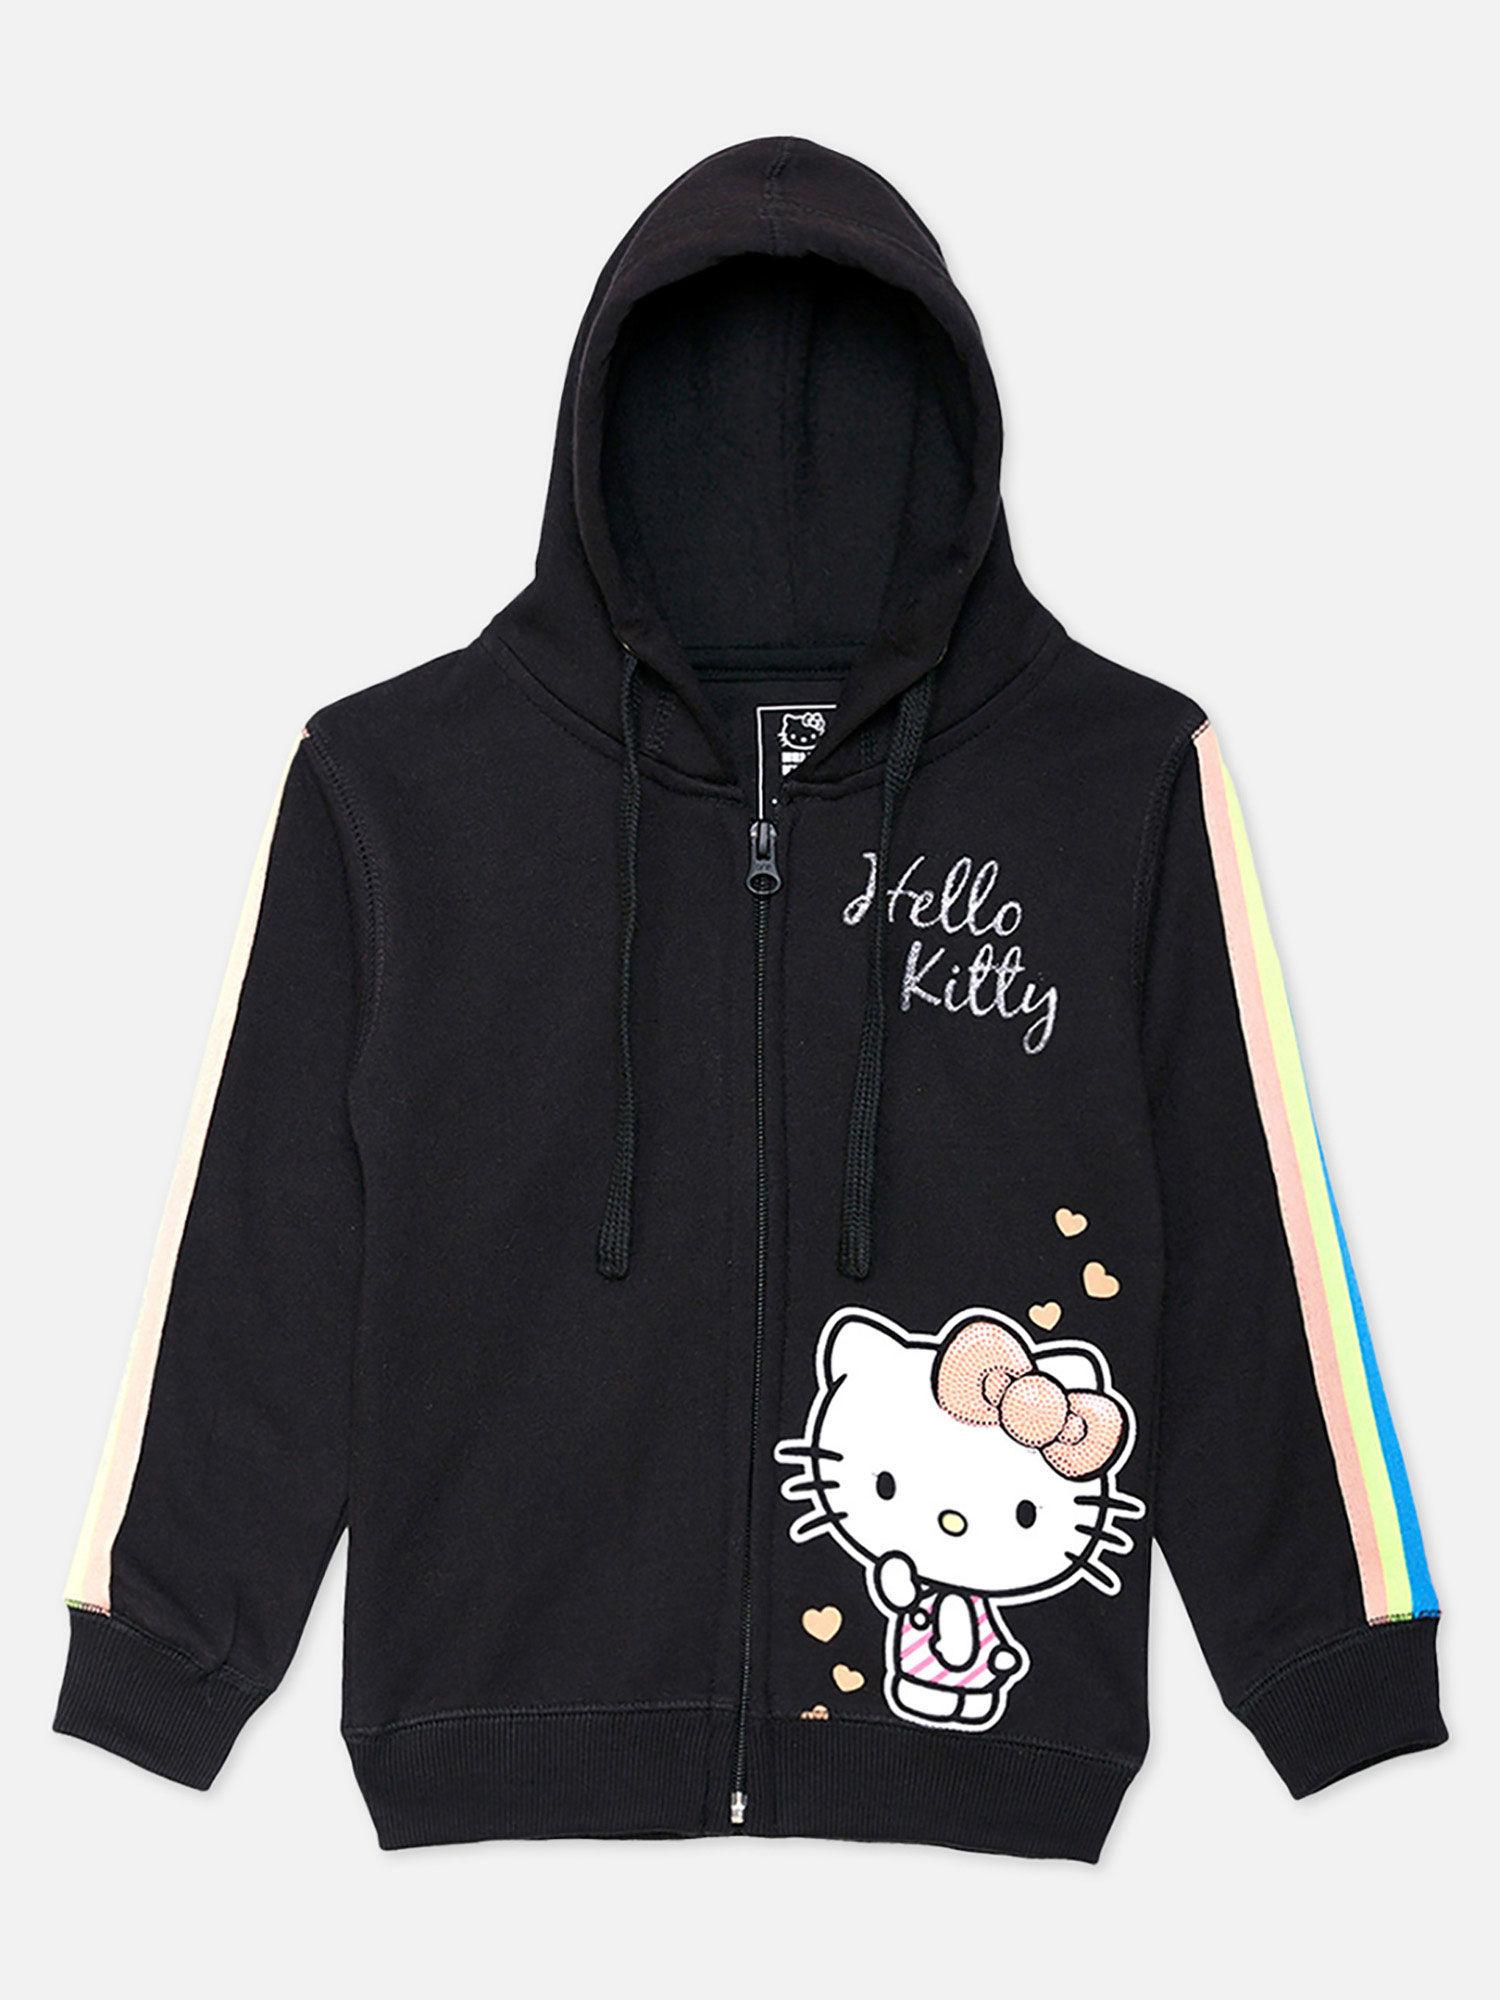 hello kitty featured black zipper hoodie for girls